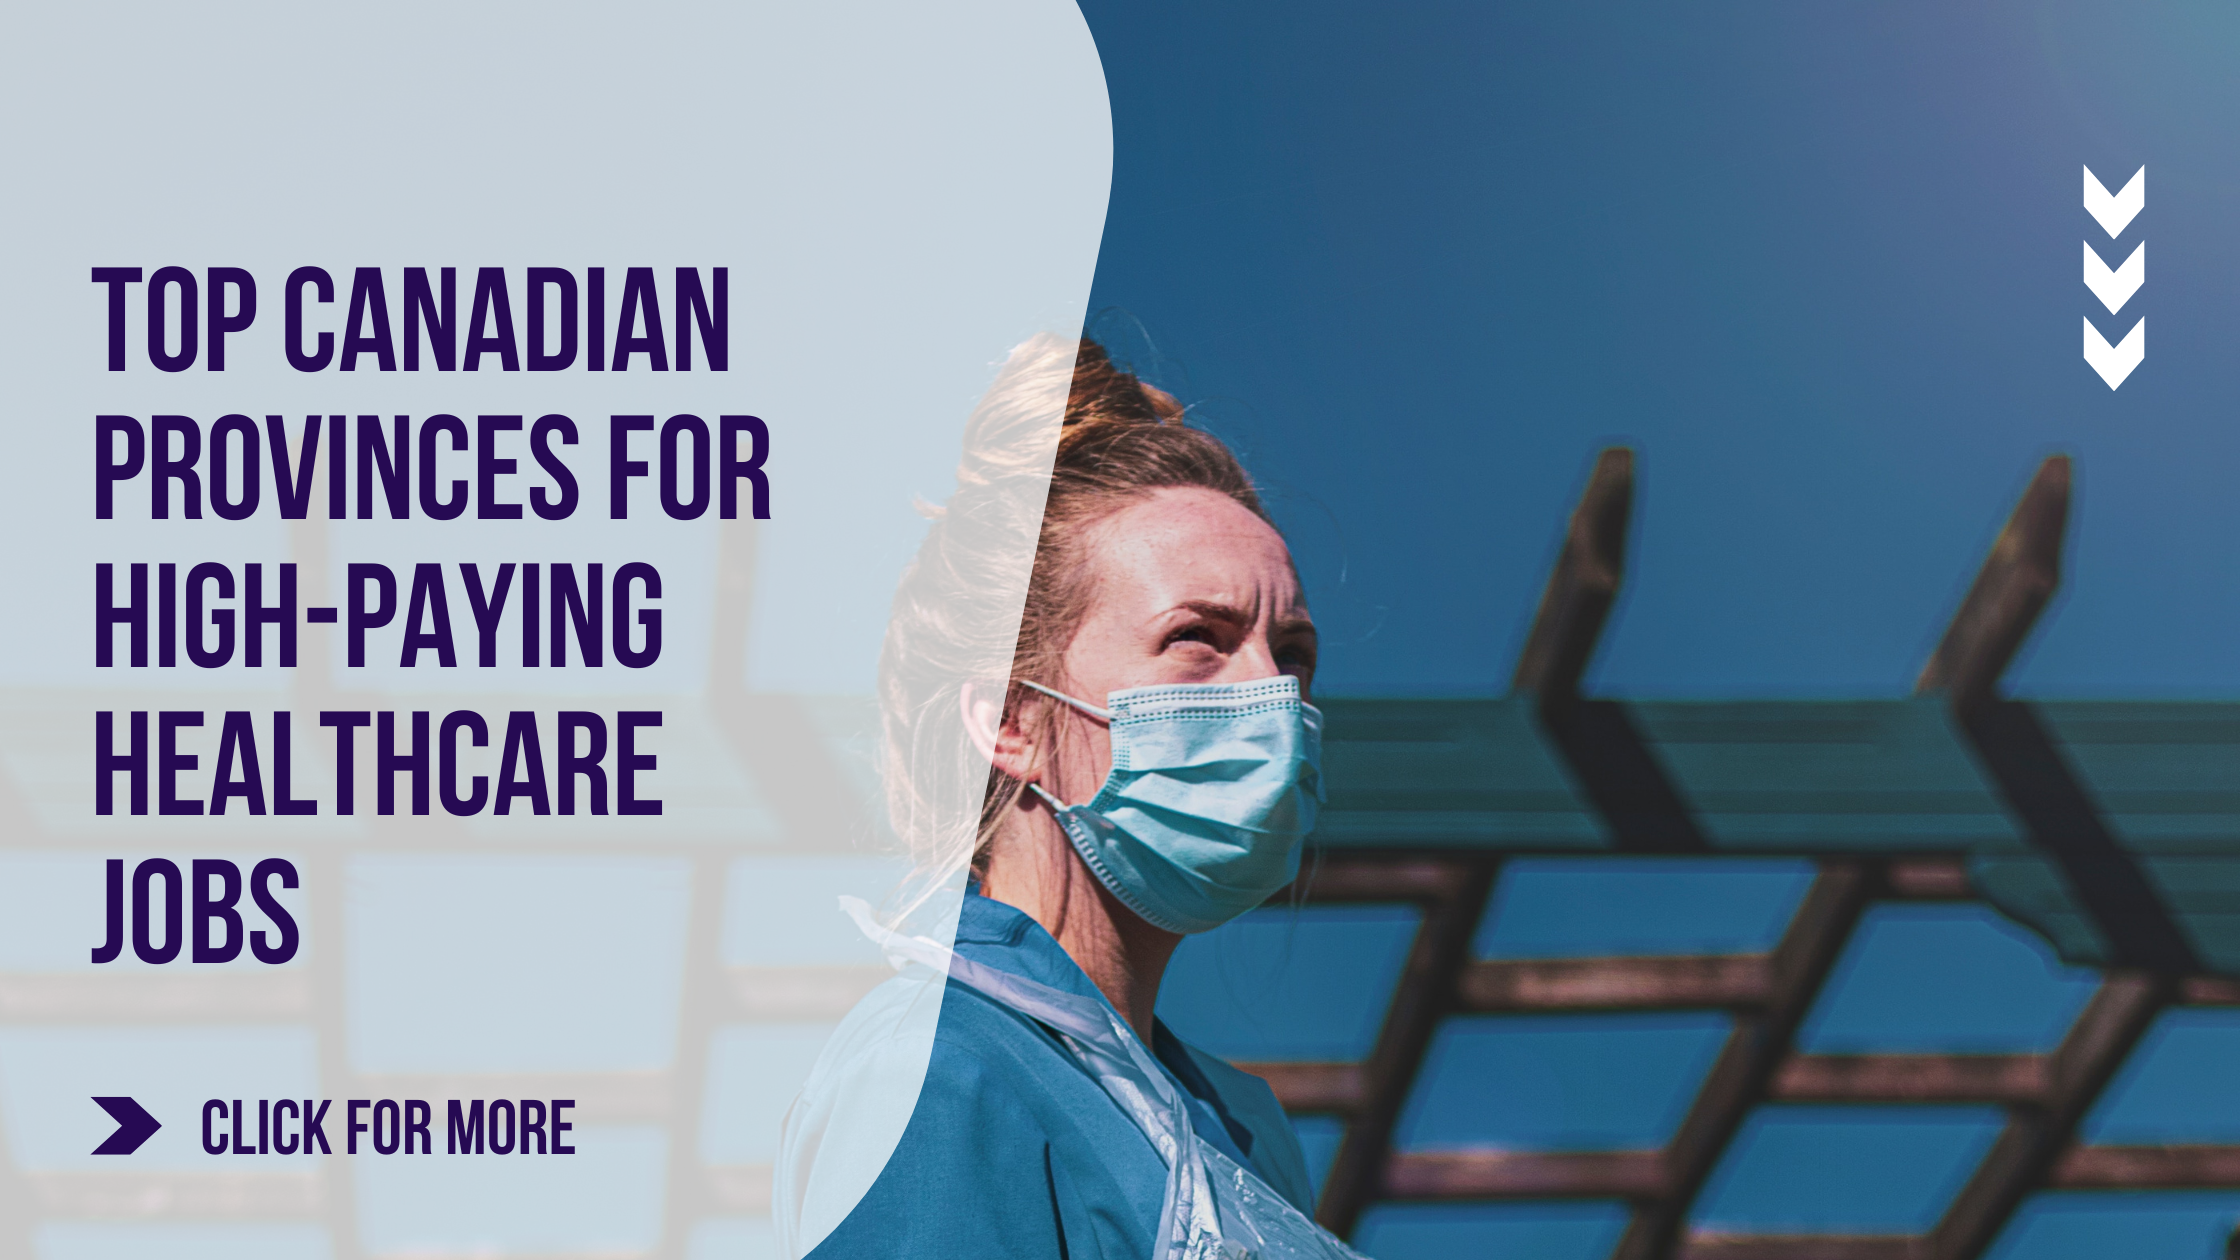 The Top Canadian Provinces for High-Paying Healthcare Jobs